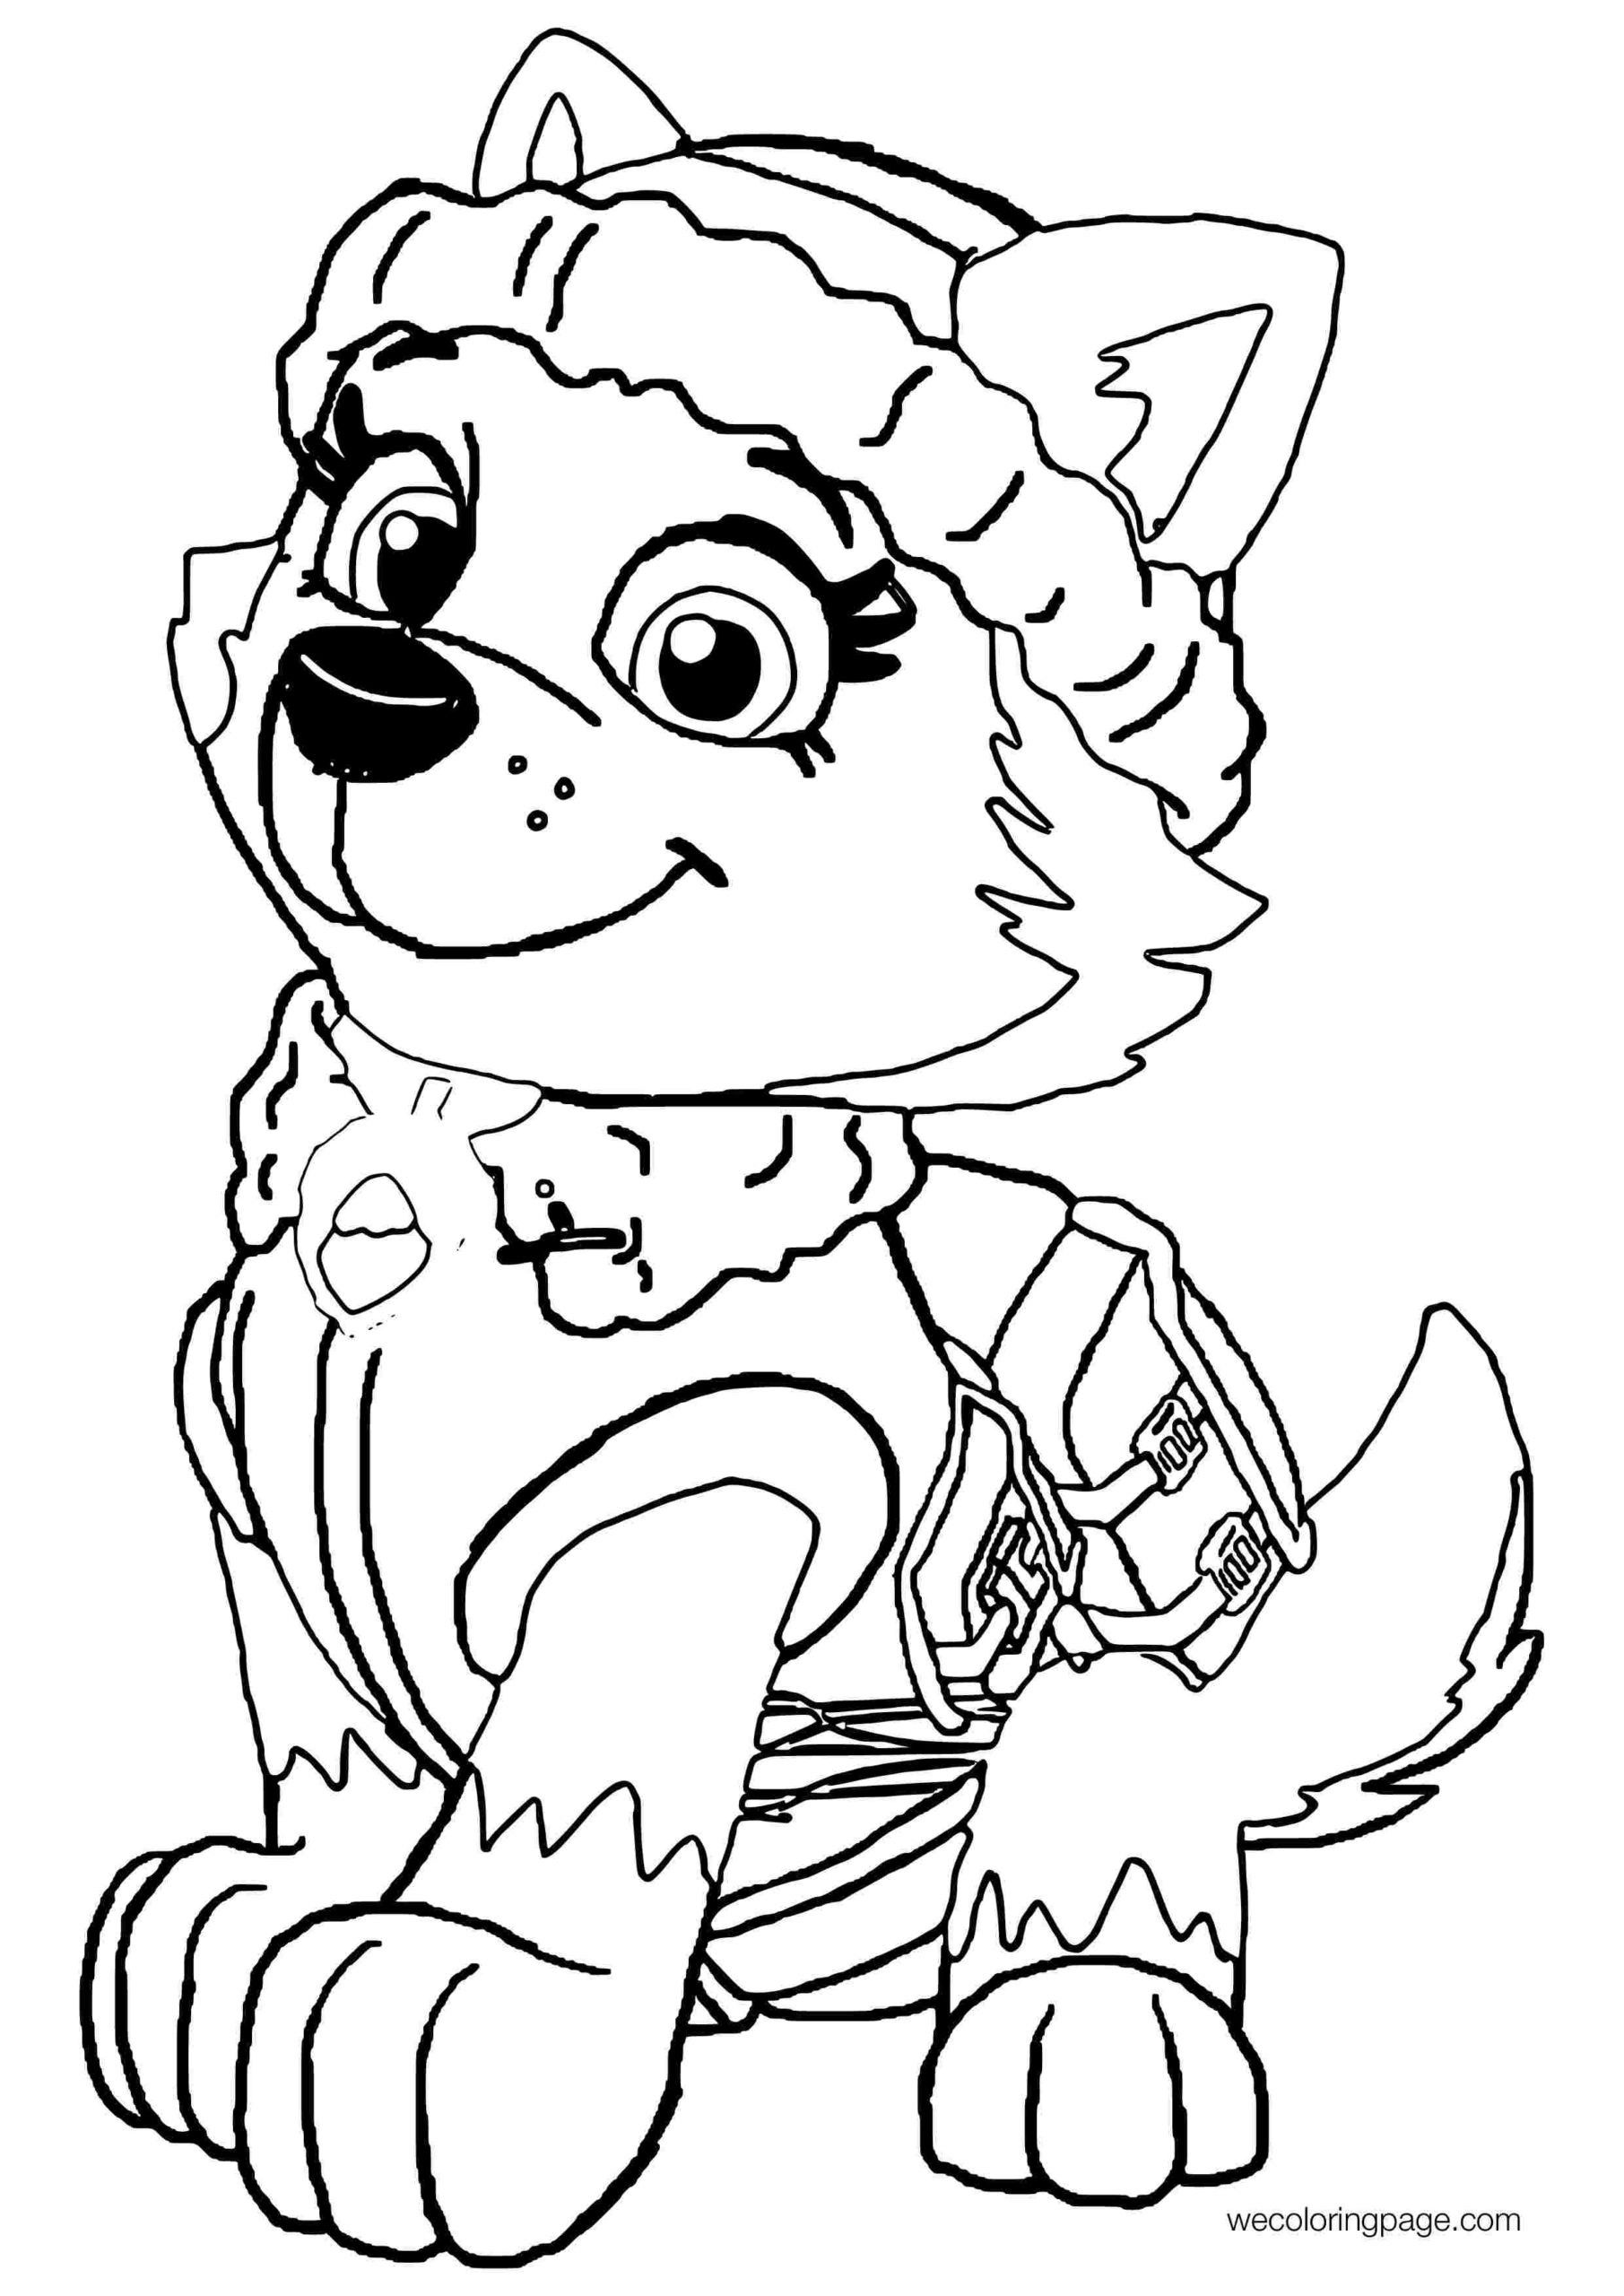 Paw Patrol Coloring Pages FREE Printable 132